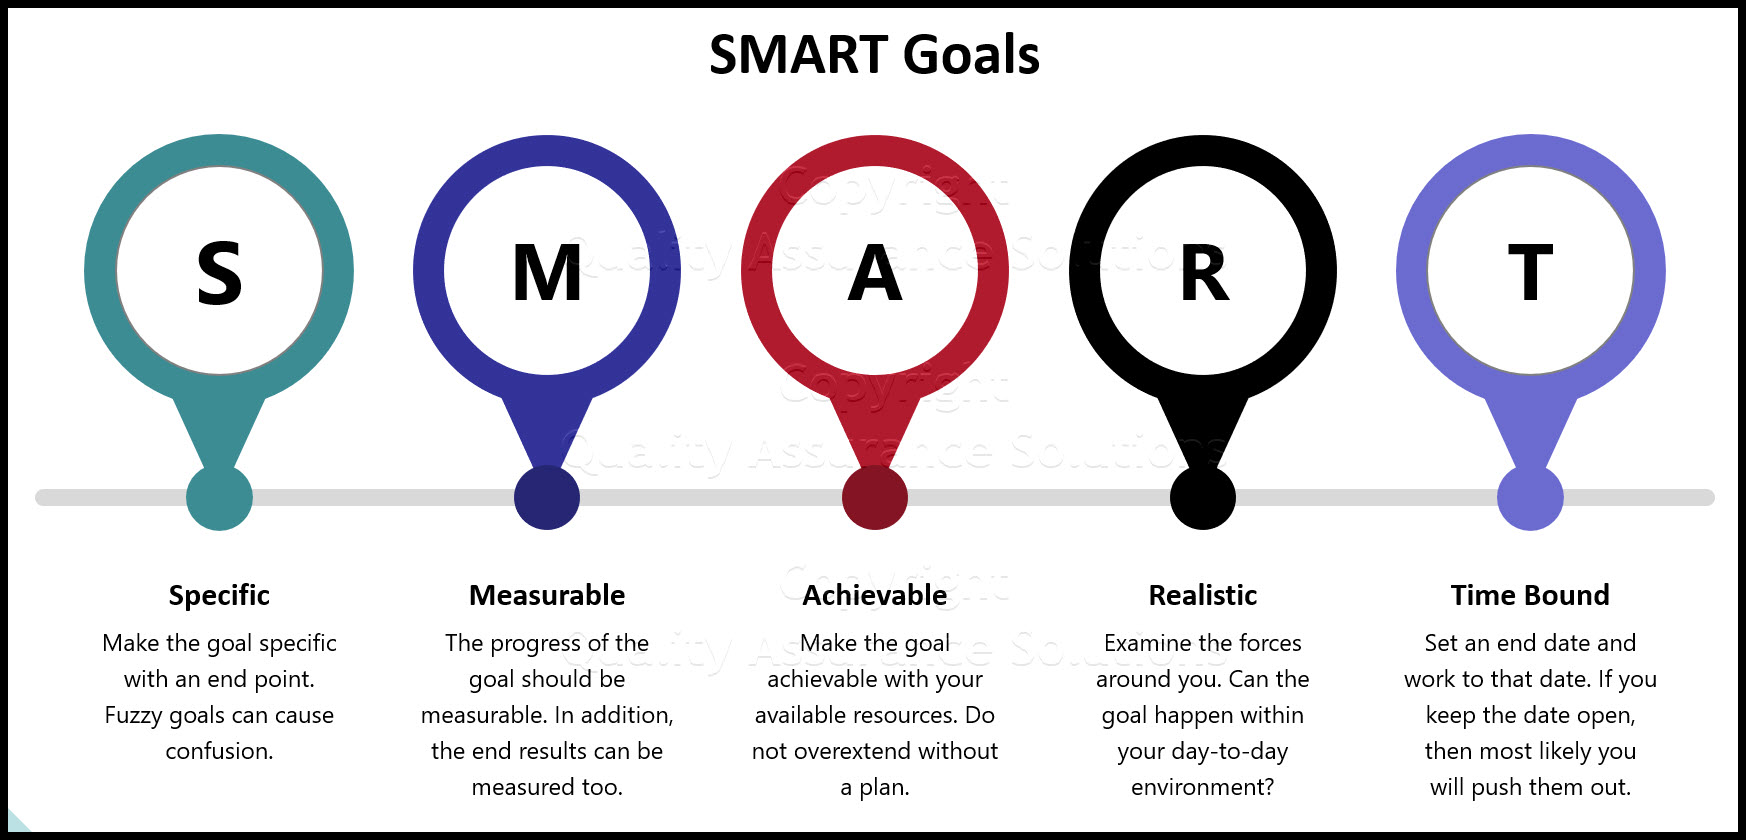 Writing SMART goals is a powerful process to clarify your objectives and set the success trajectory of your team.